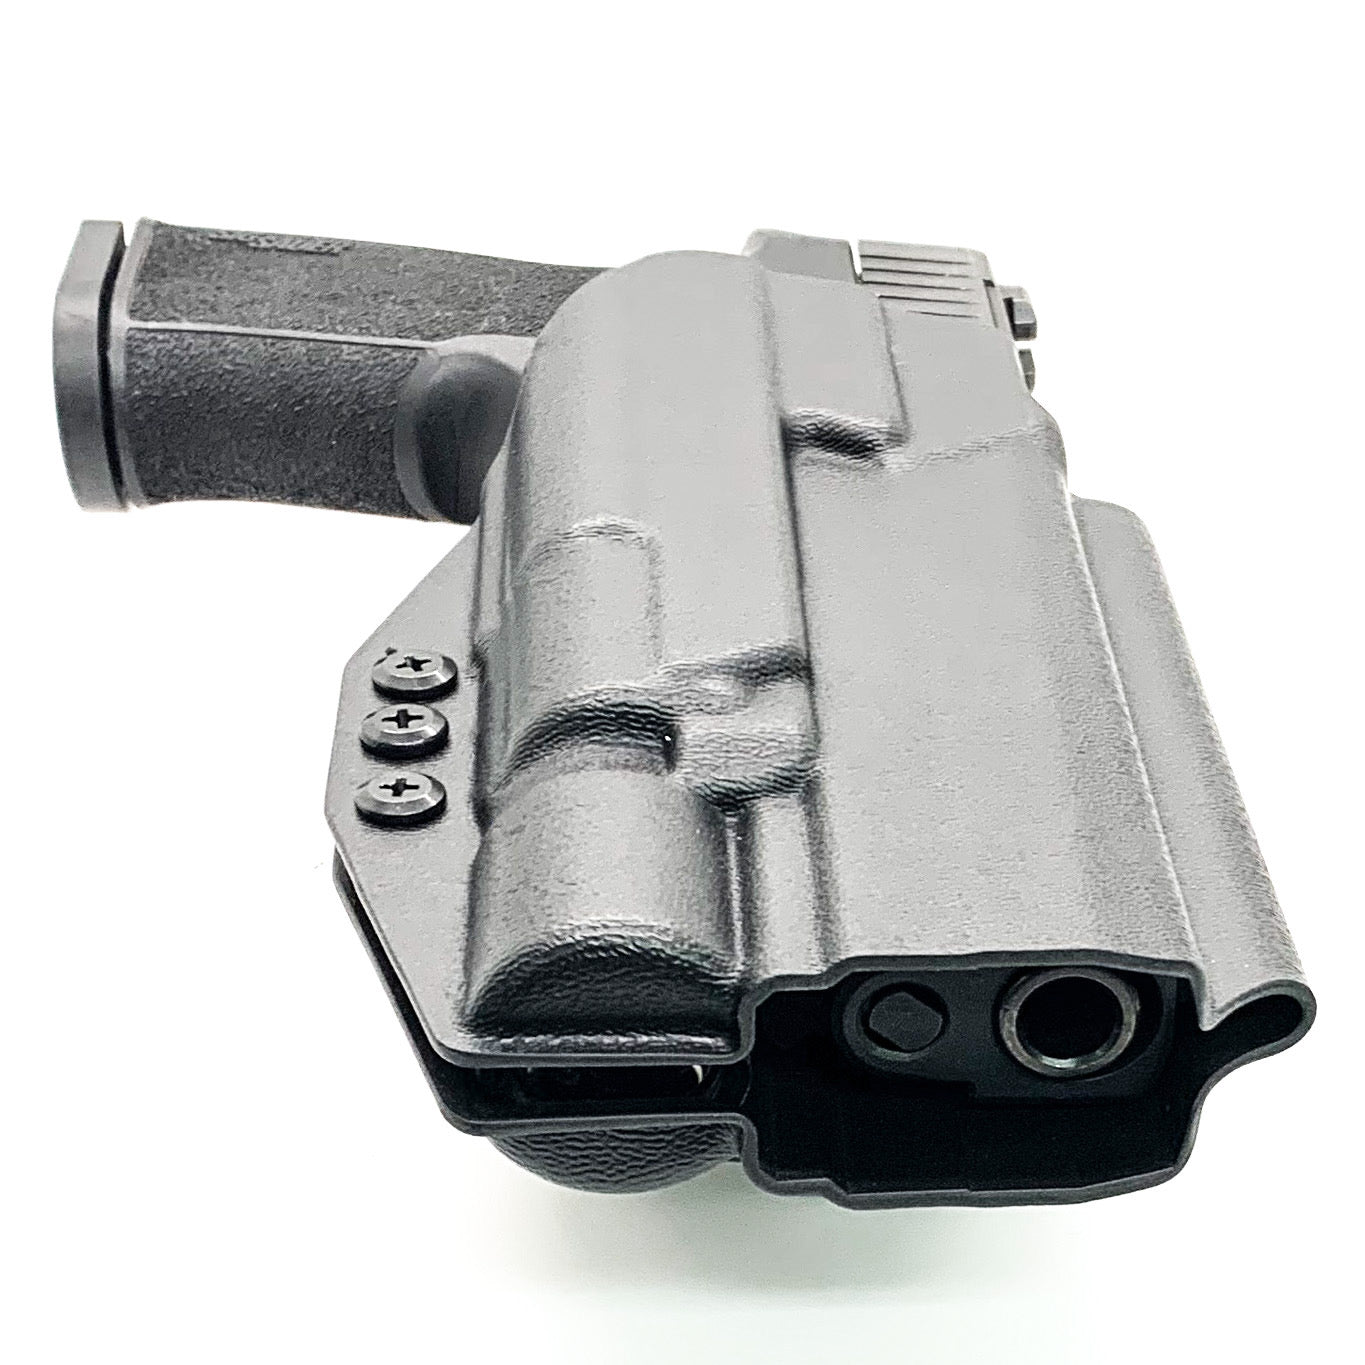 Outside Waistband Duty & Competition Kydex holster designed to fit the Sig Sauer 10MM P320-XTEN and Surefire X-300U.  Full sweat guard, adjustable retention, open muzzle cleared for a red dot sight. Proudly made in the USA for veterans & law enforcement. 10 MM P320 XTEN, P320 X Ten, or P 320 XTEN X-300 U X-300A X-300B